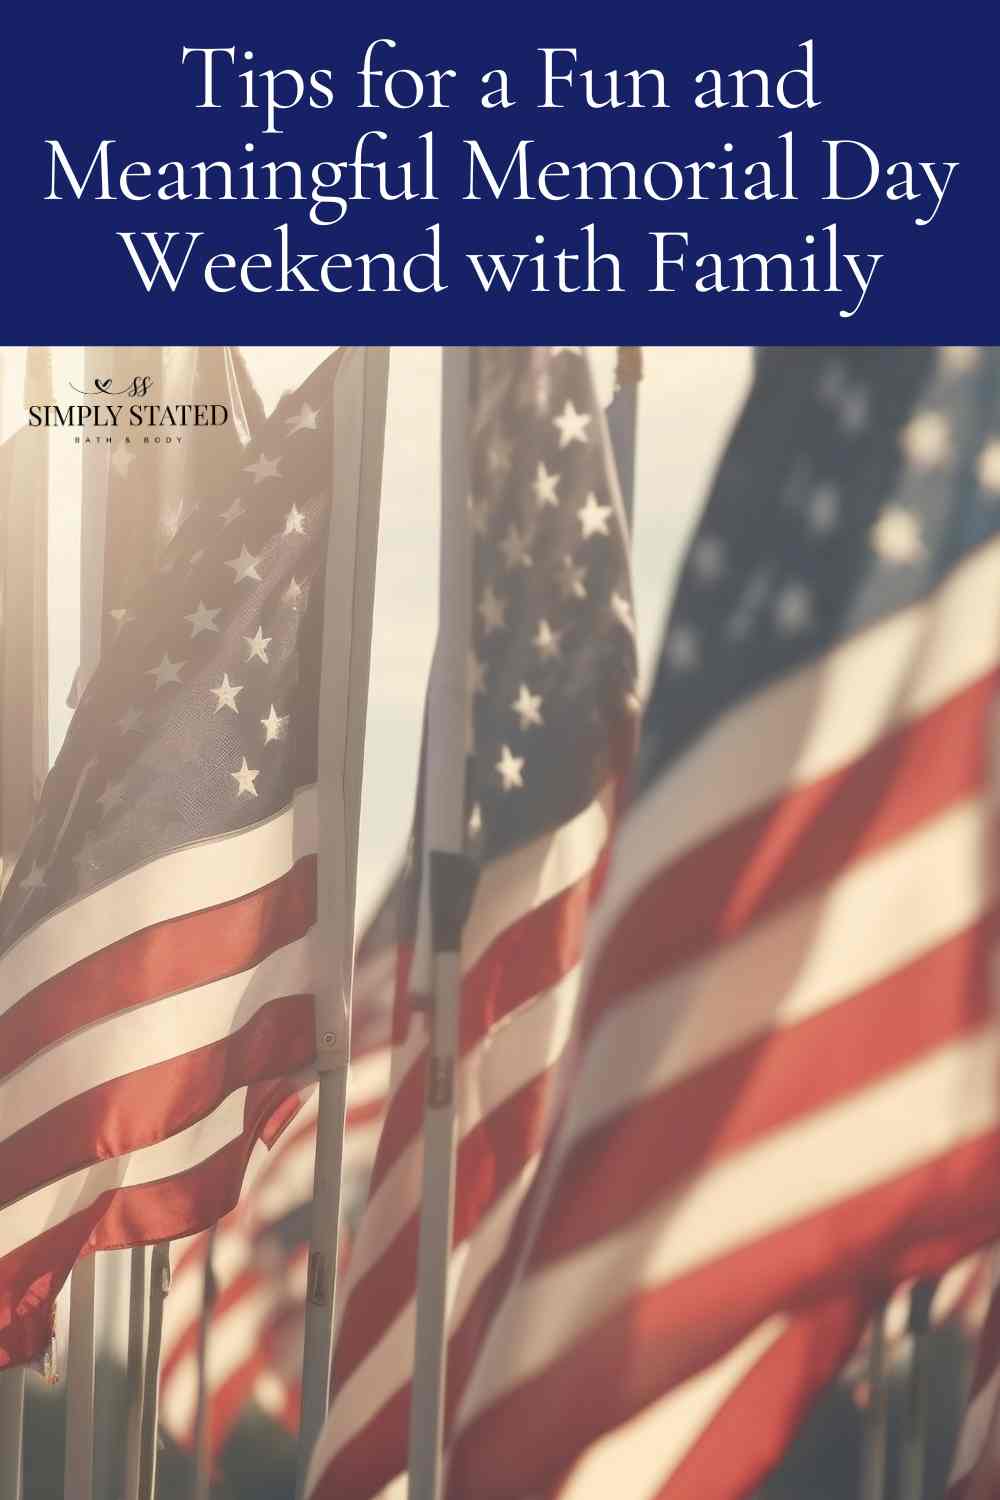 Tips for a Fun and Meaningful Memorial Day Weekend with Family